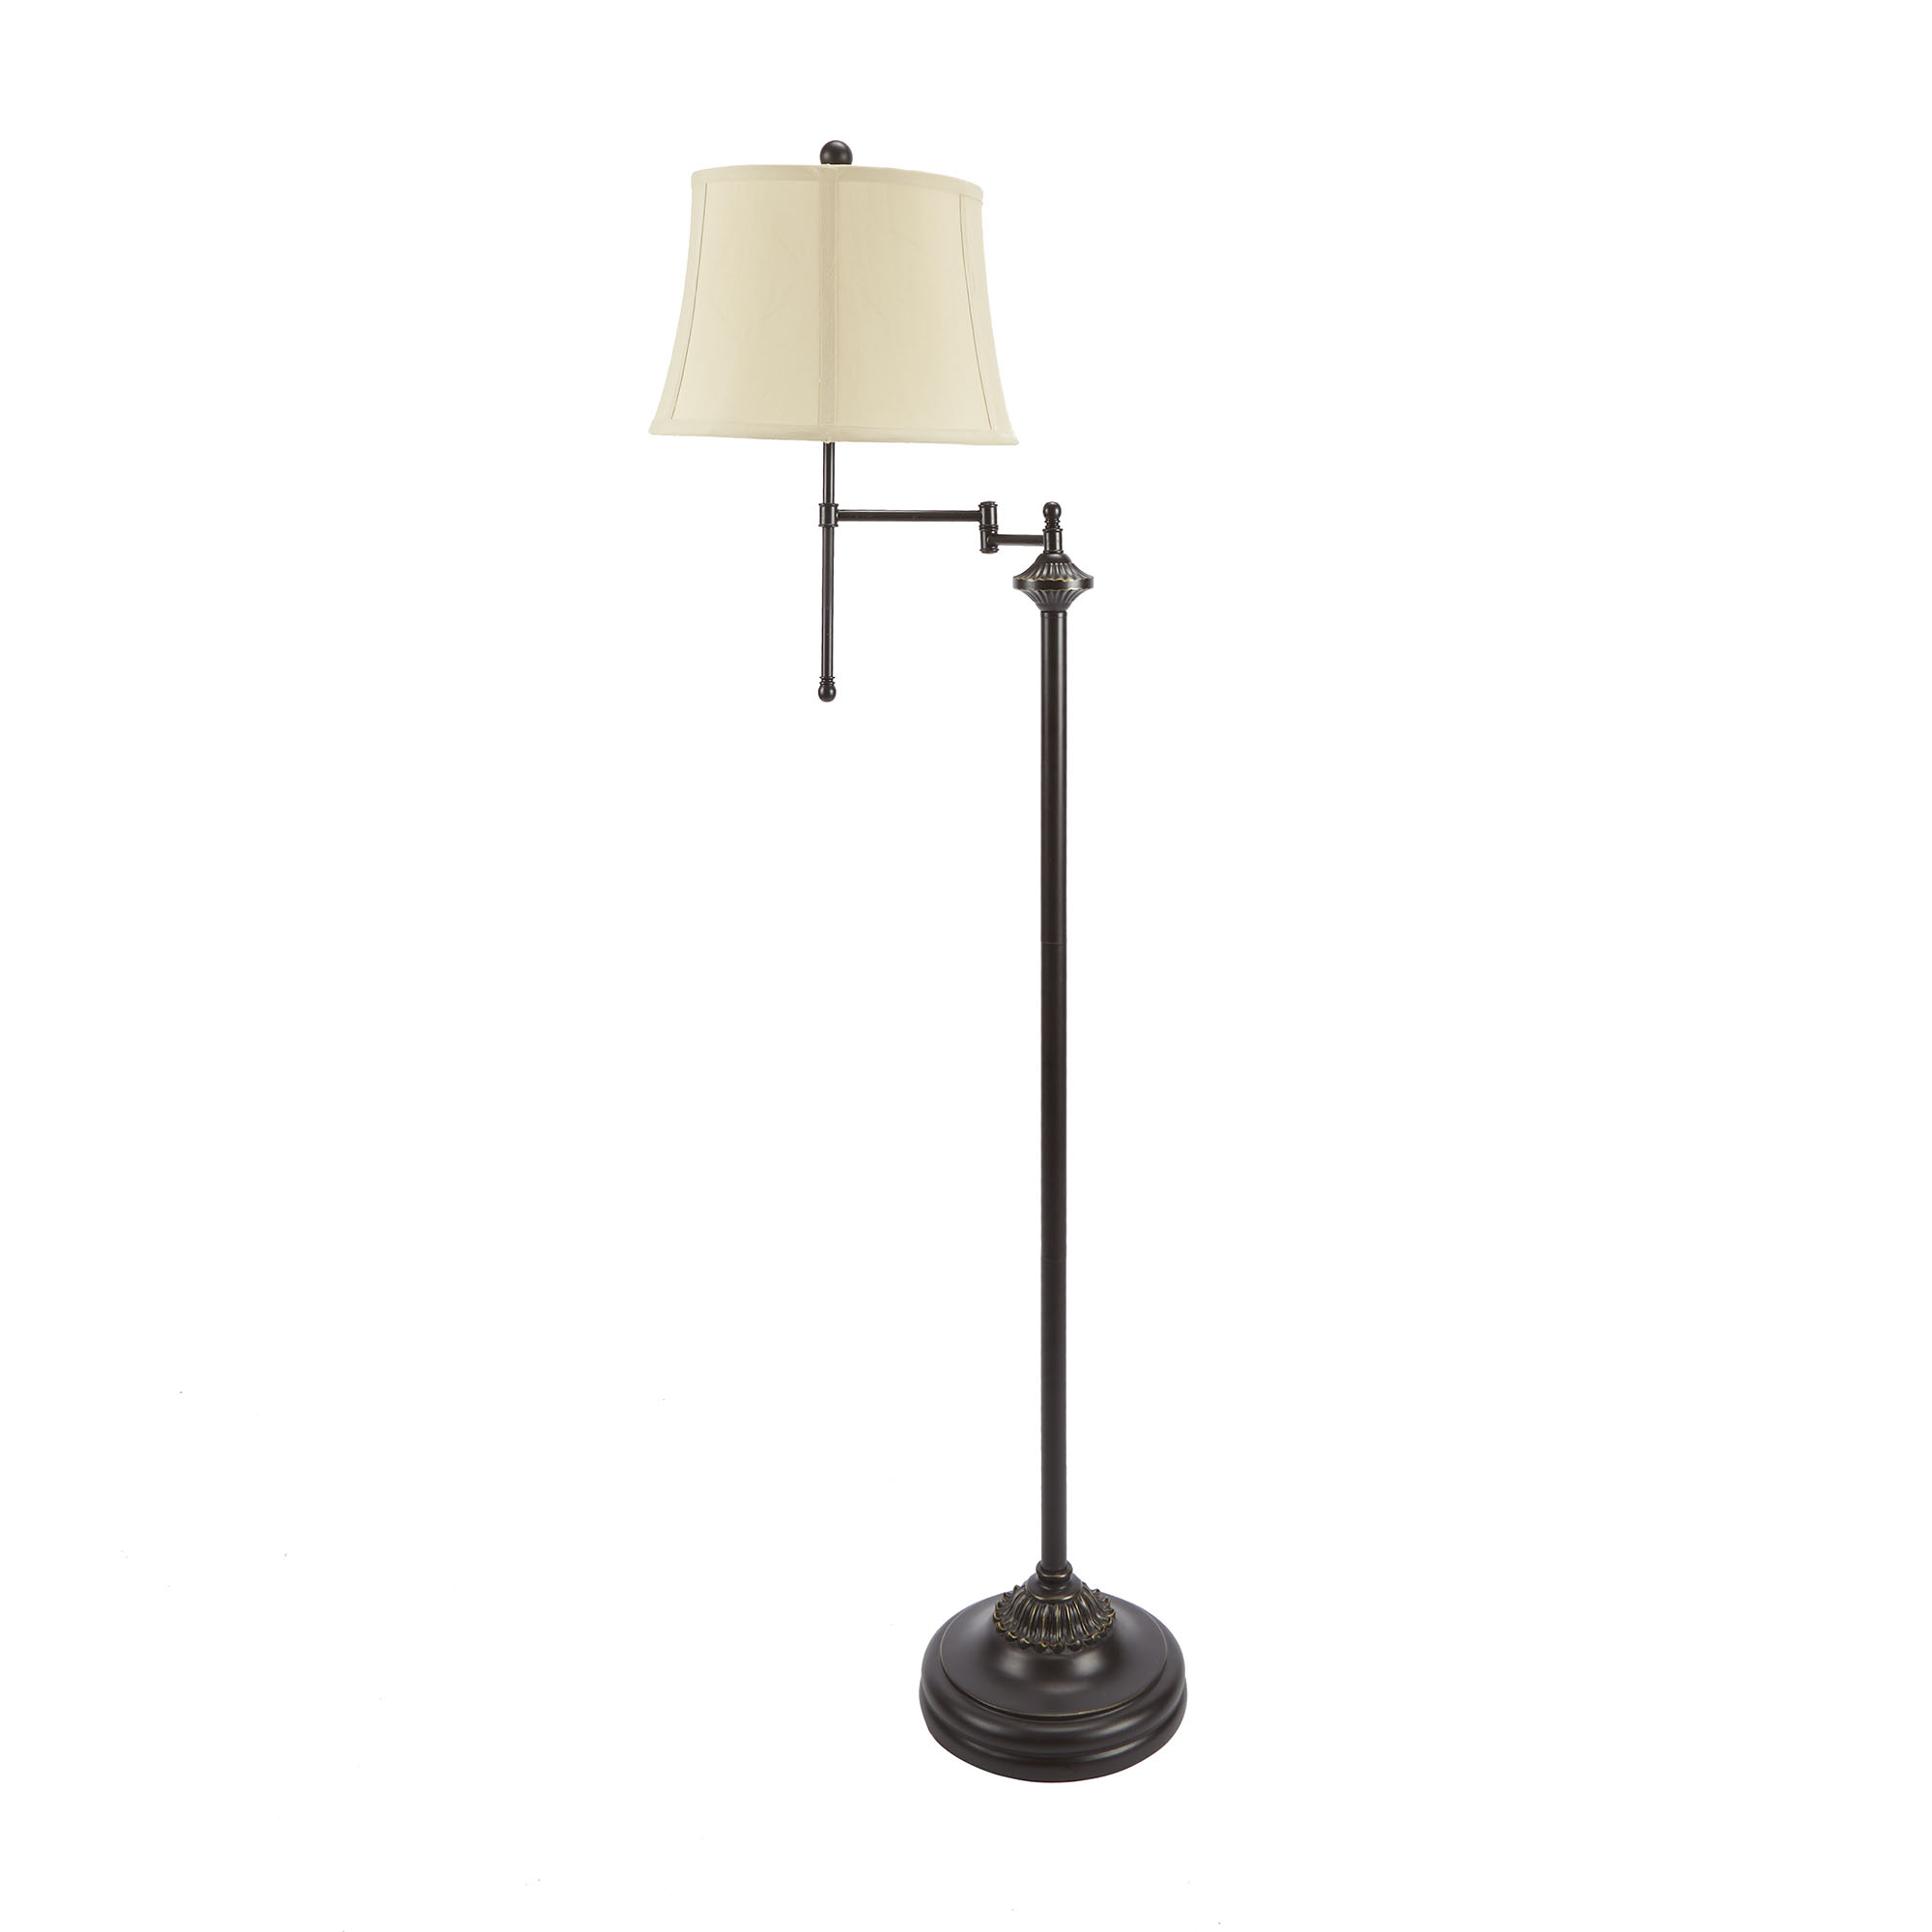 Better Homes Gardens 59 Swing Arm Floor Lamp Walmart intended for proportions 2000 X 2000